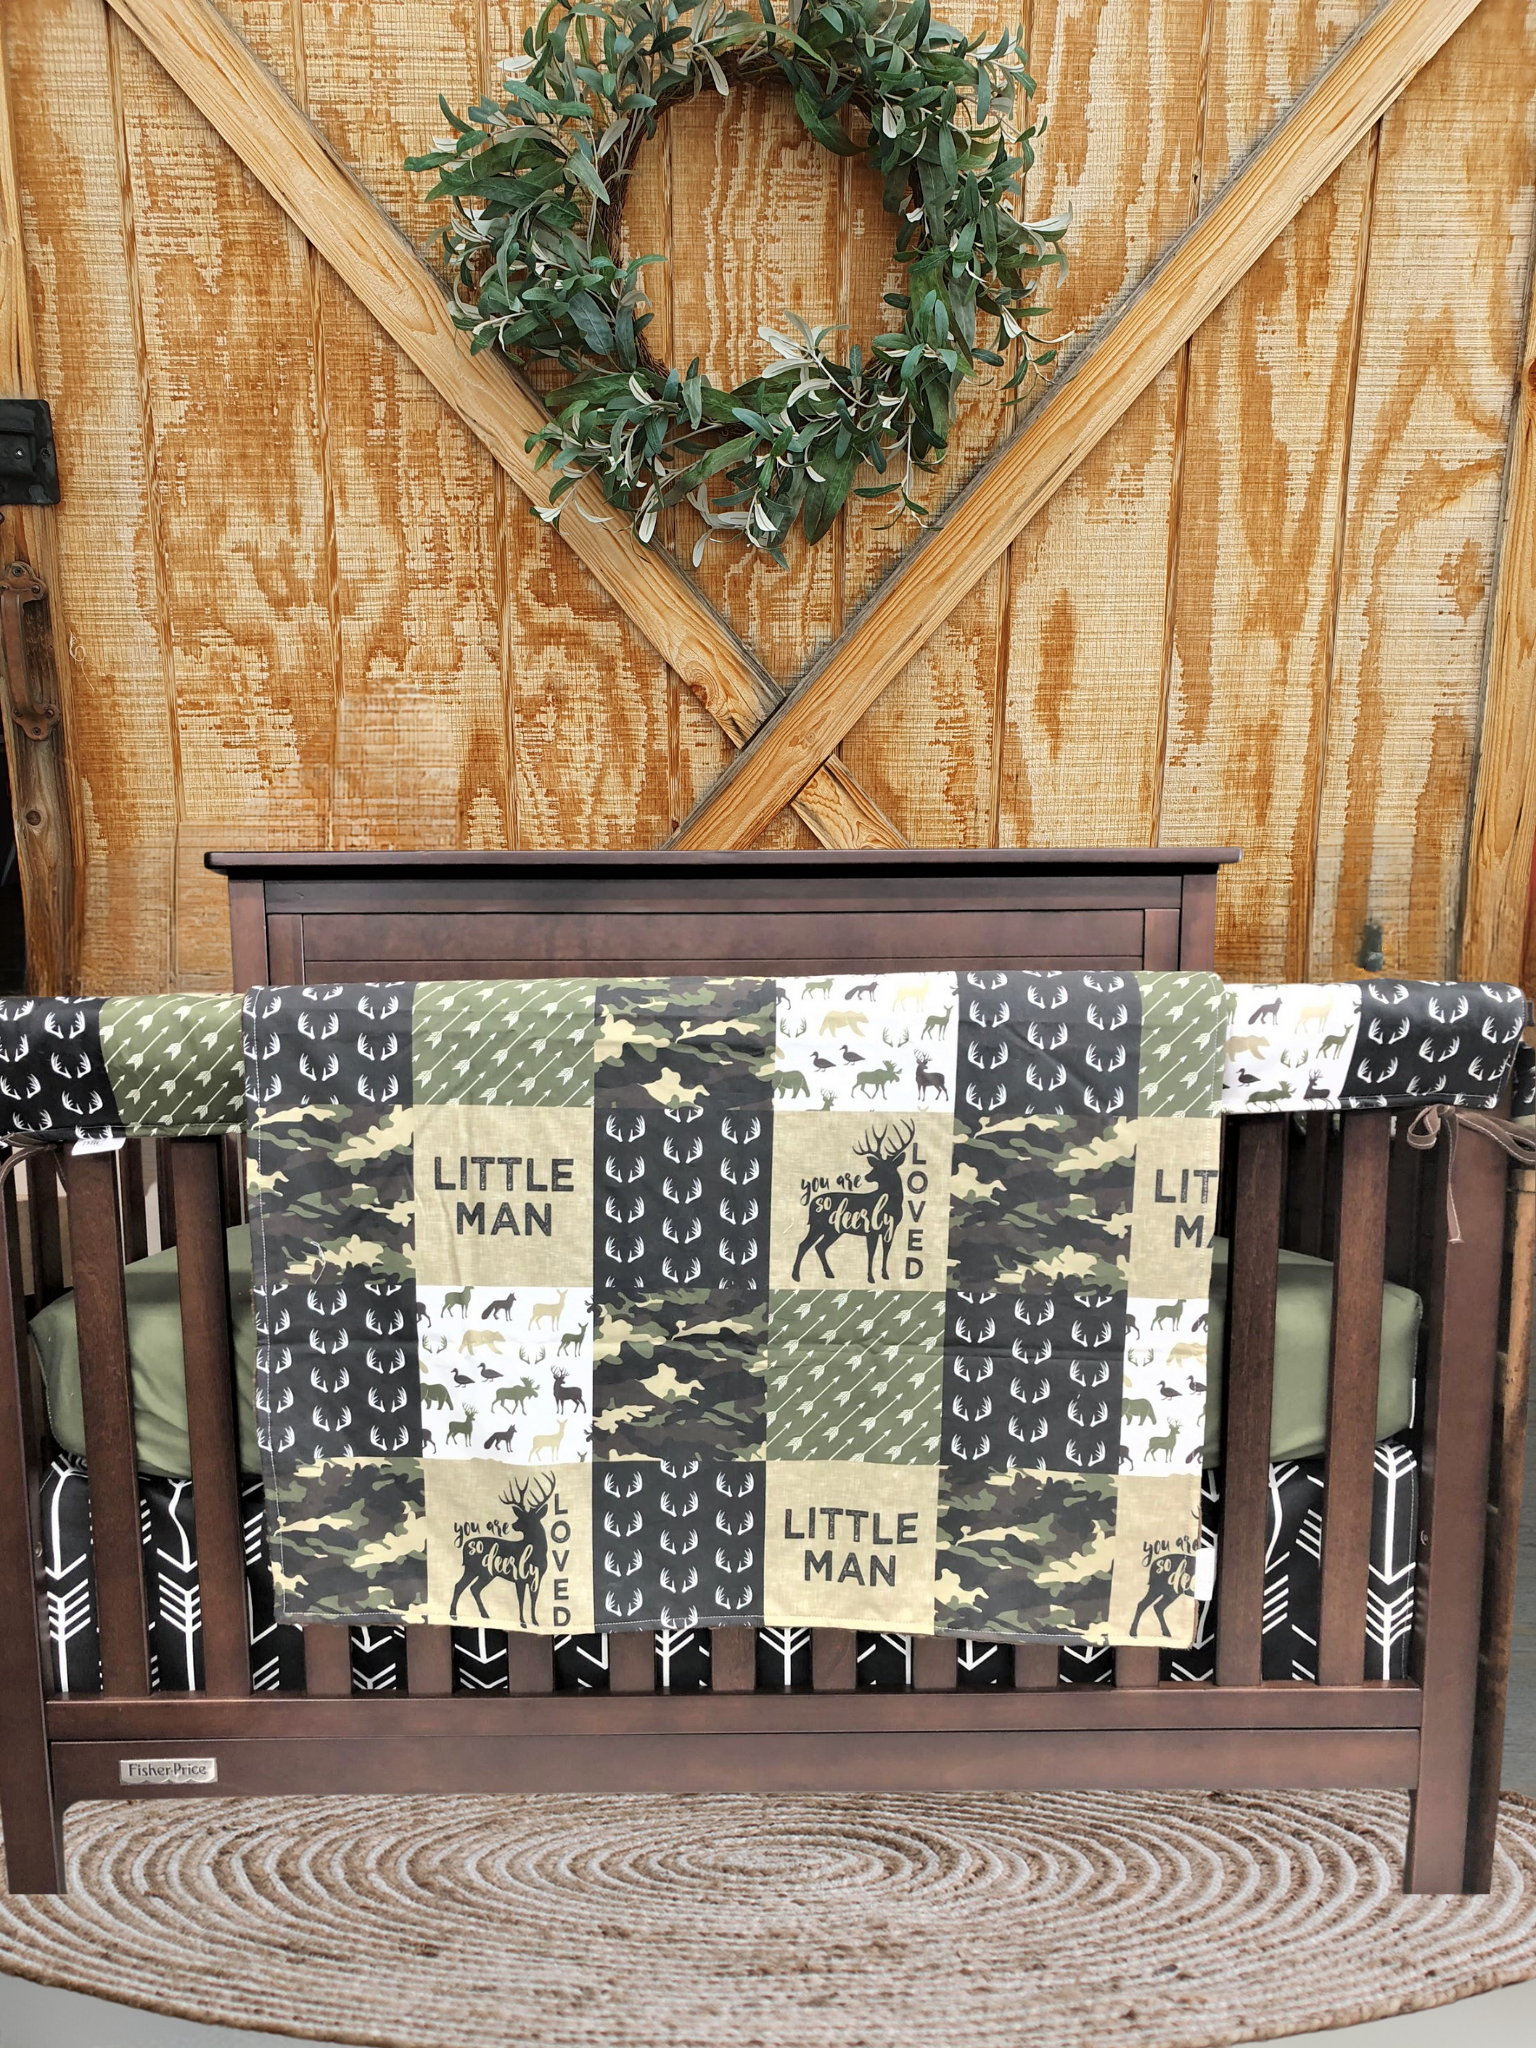 Hunting and Bass Fishing Crib Mobile for Woodland, Camping, Rustic Nursery  Largemouth Bass, Deer, Ducks Hanging Mobile 